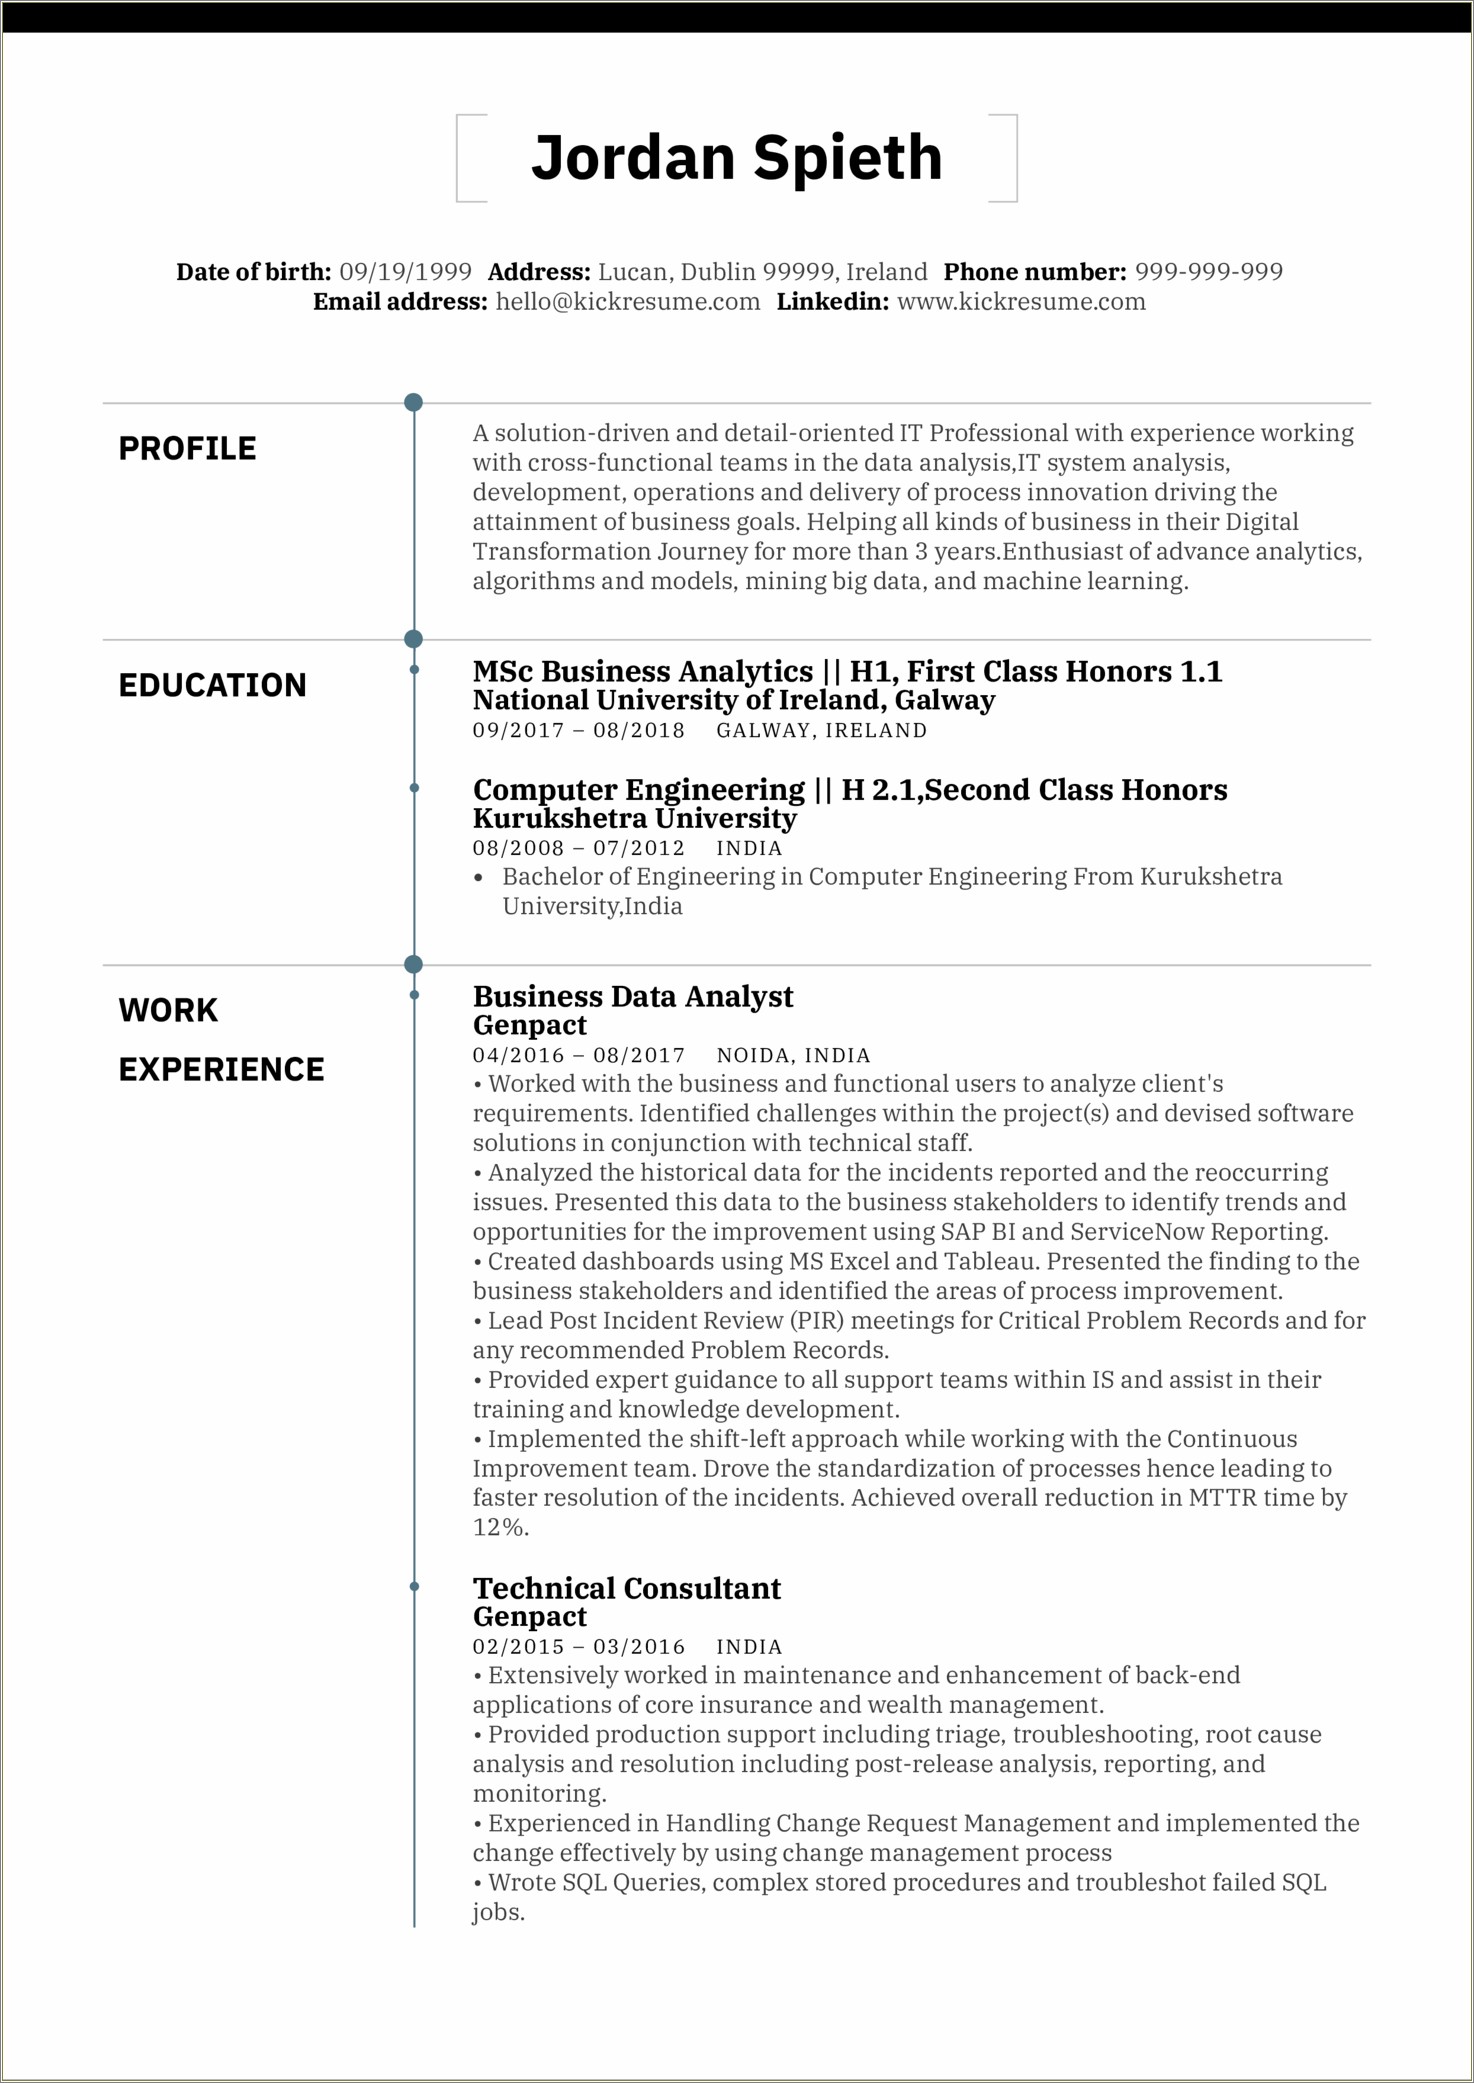 Functional Summary In A Resume Examples